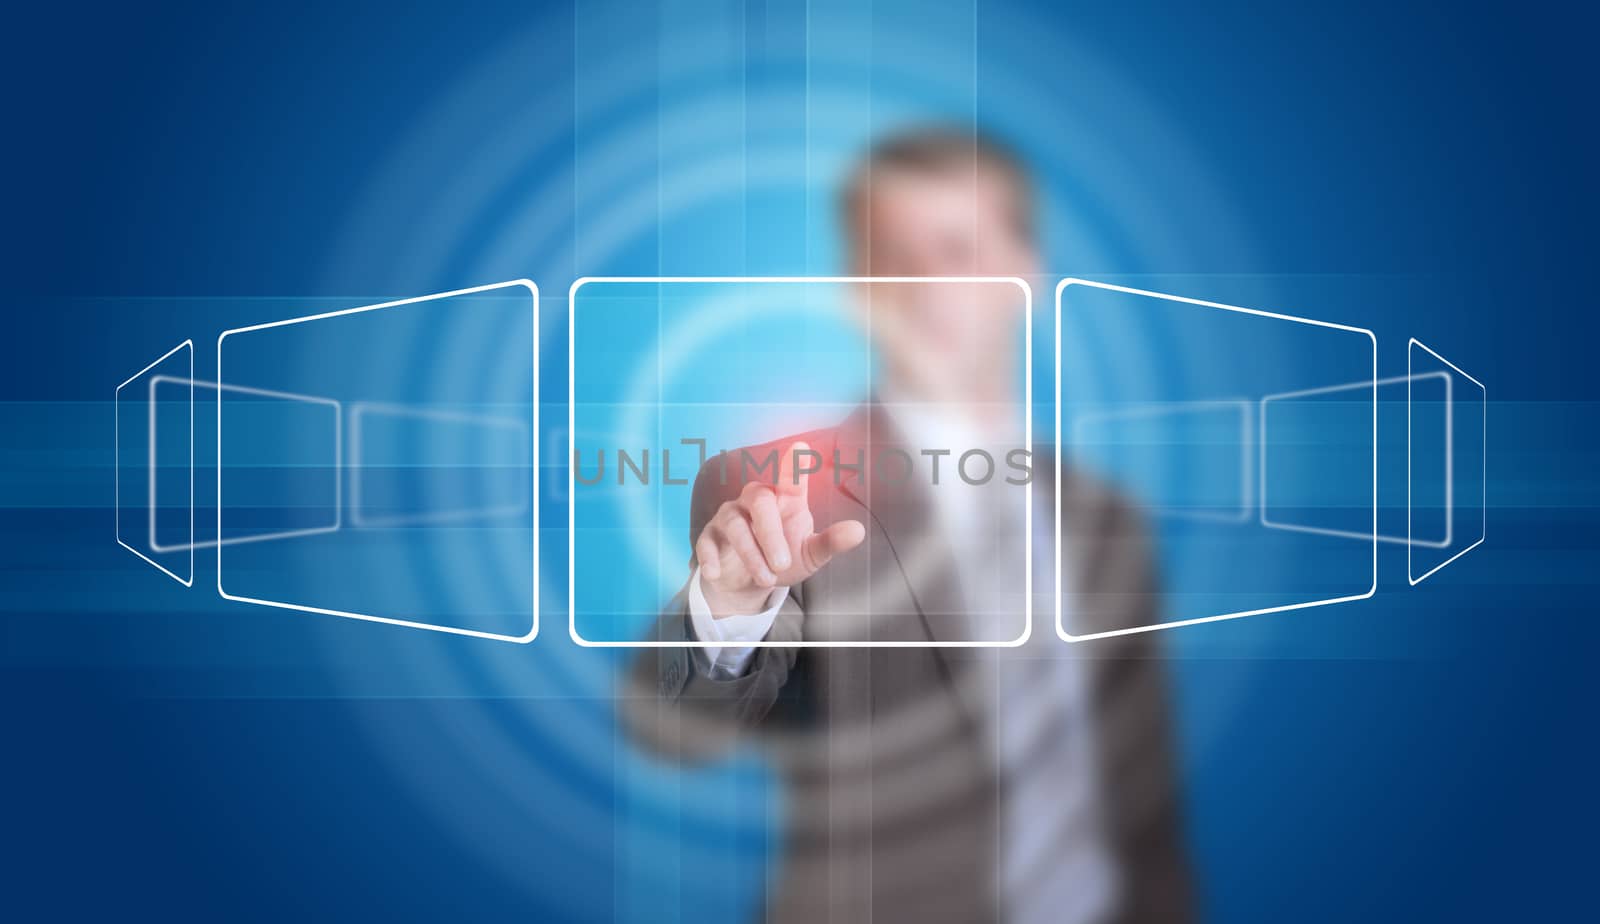 Businessman in suit finger presses virtual button. Glow circles and blue rectangles